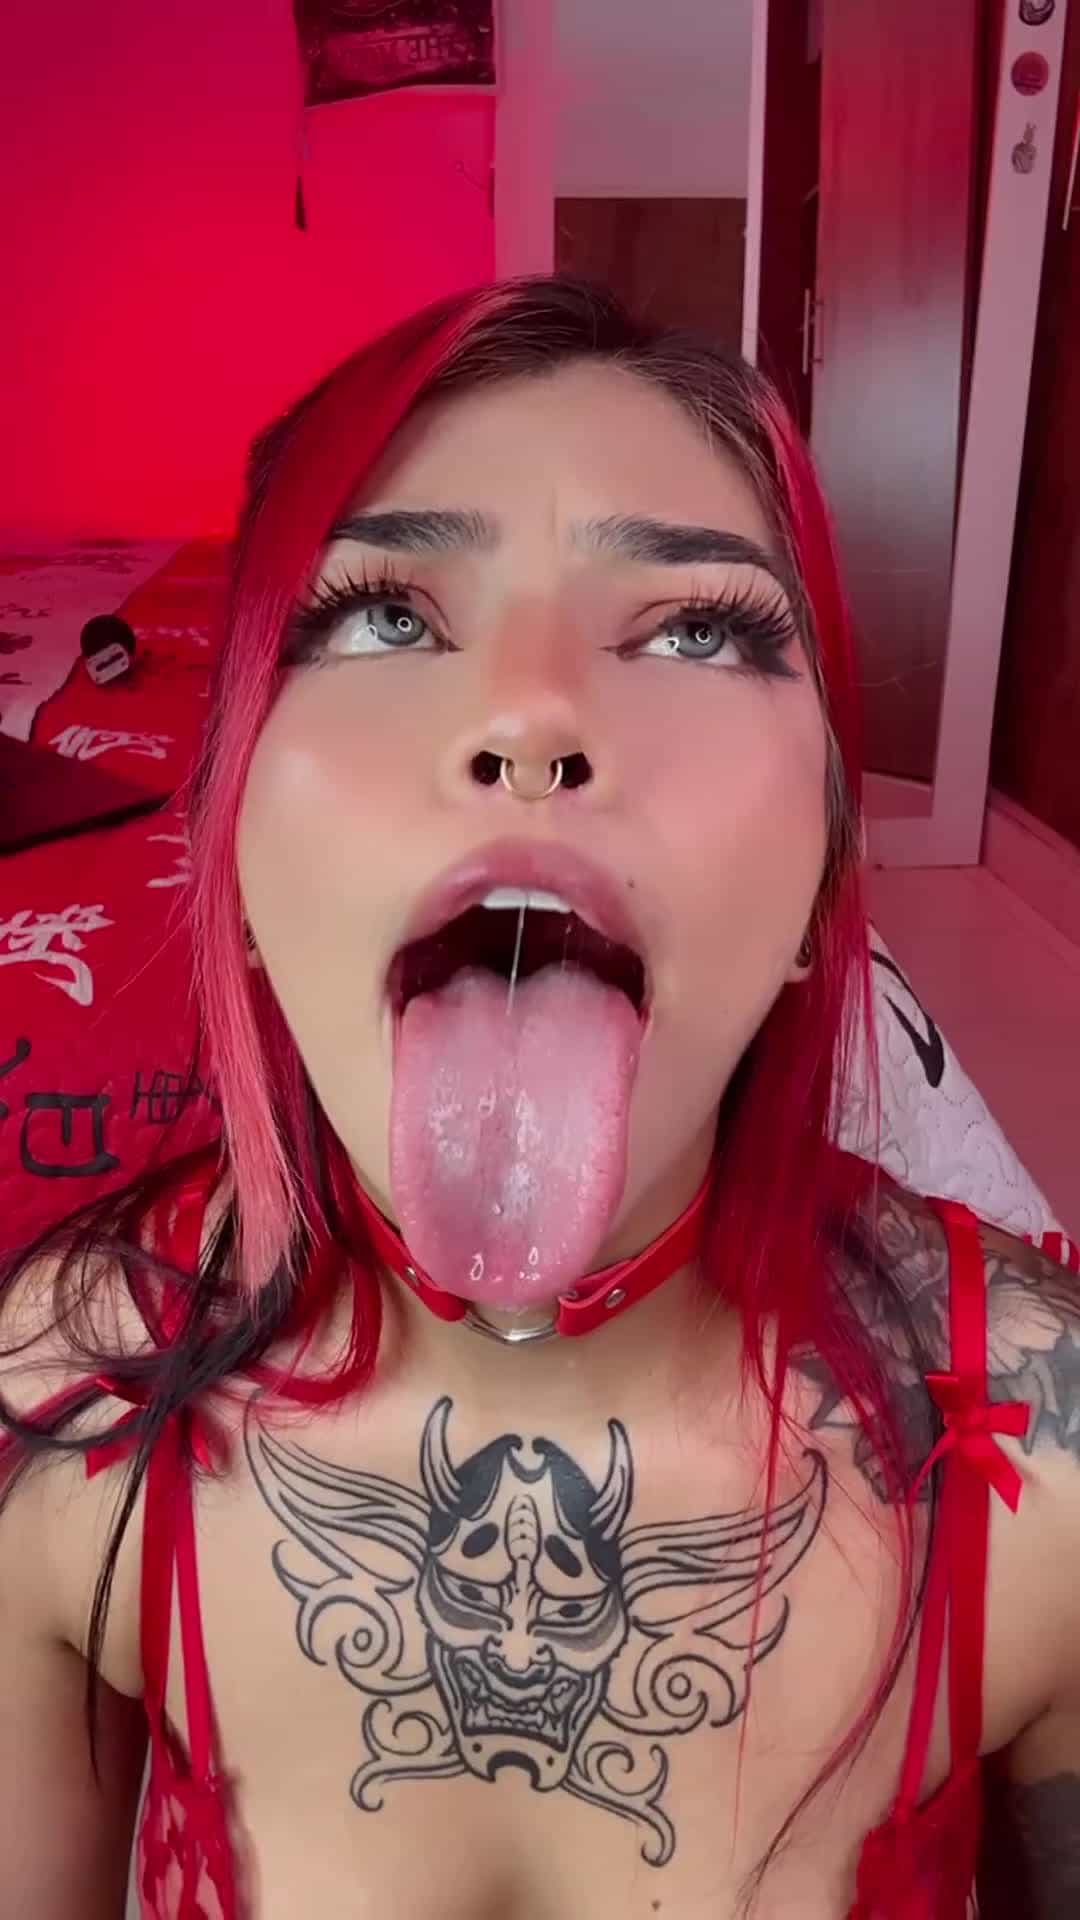 I want you to make a mess in my throat with your cock daddy 